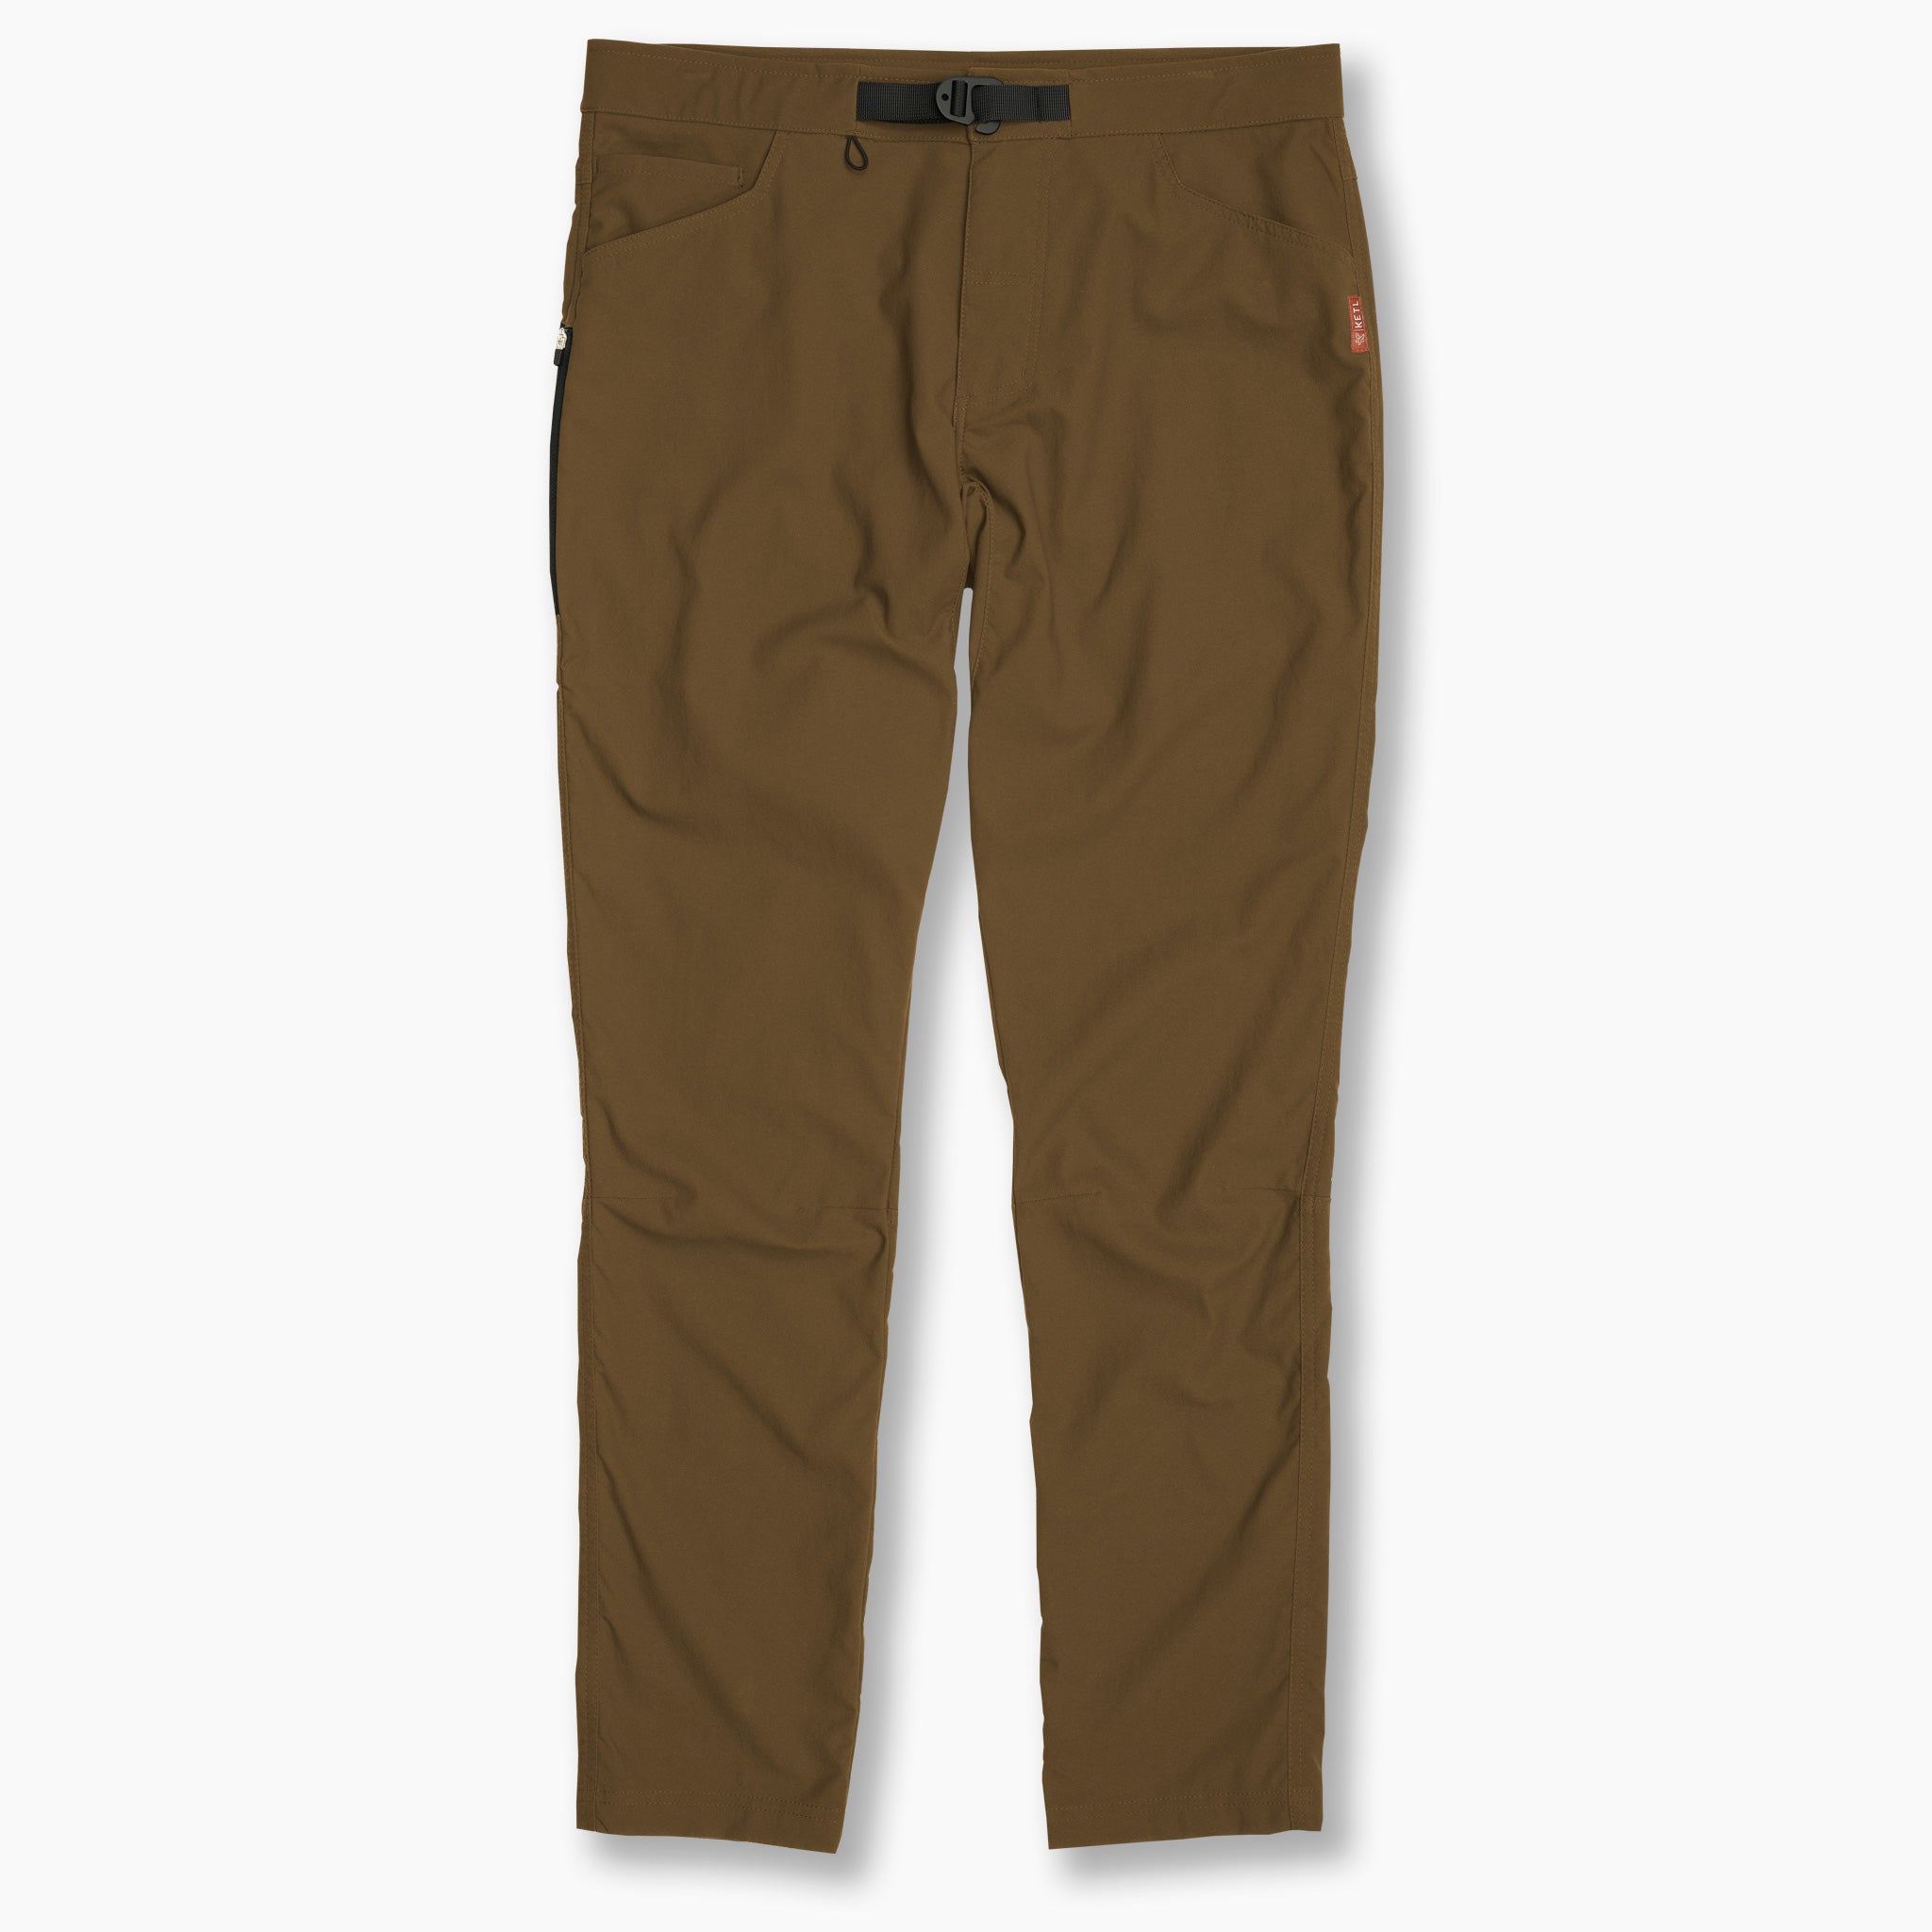 686 Men's Anything Cargo Pant - Slim Fit - Outtabounds